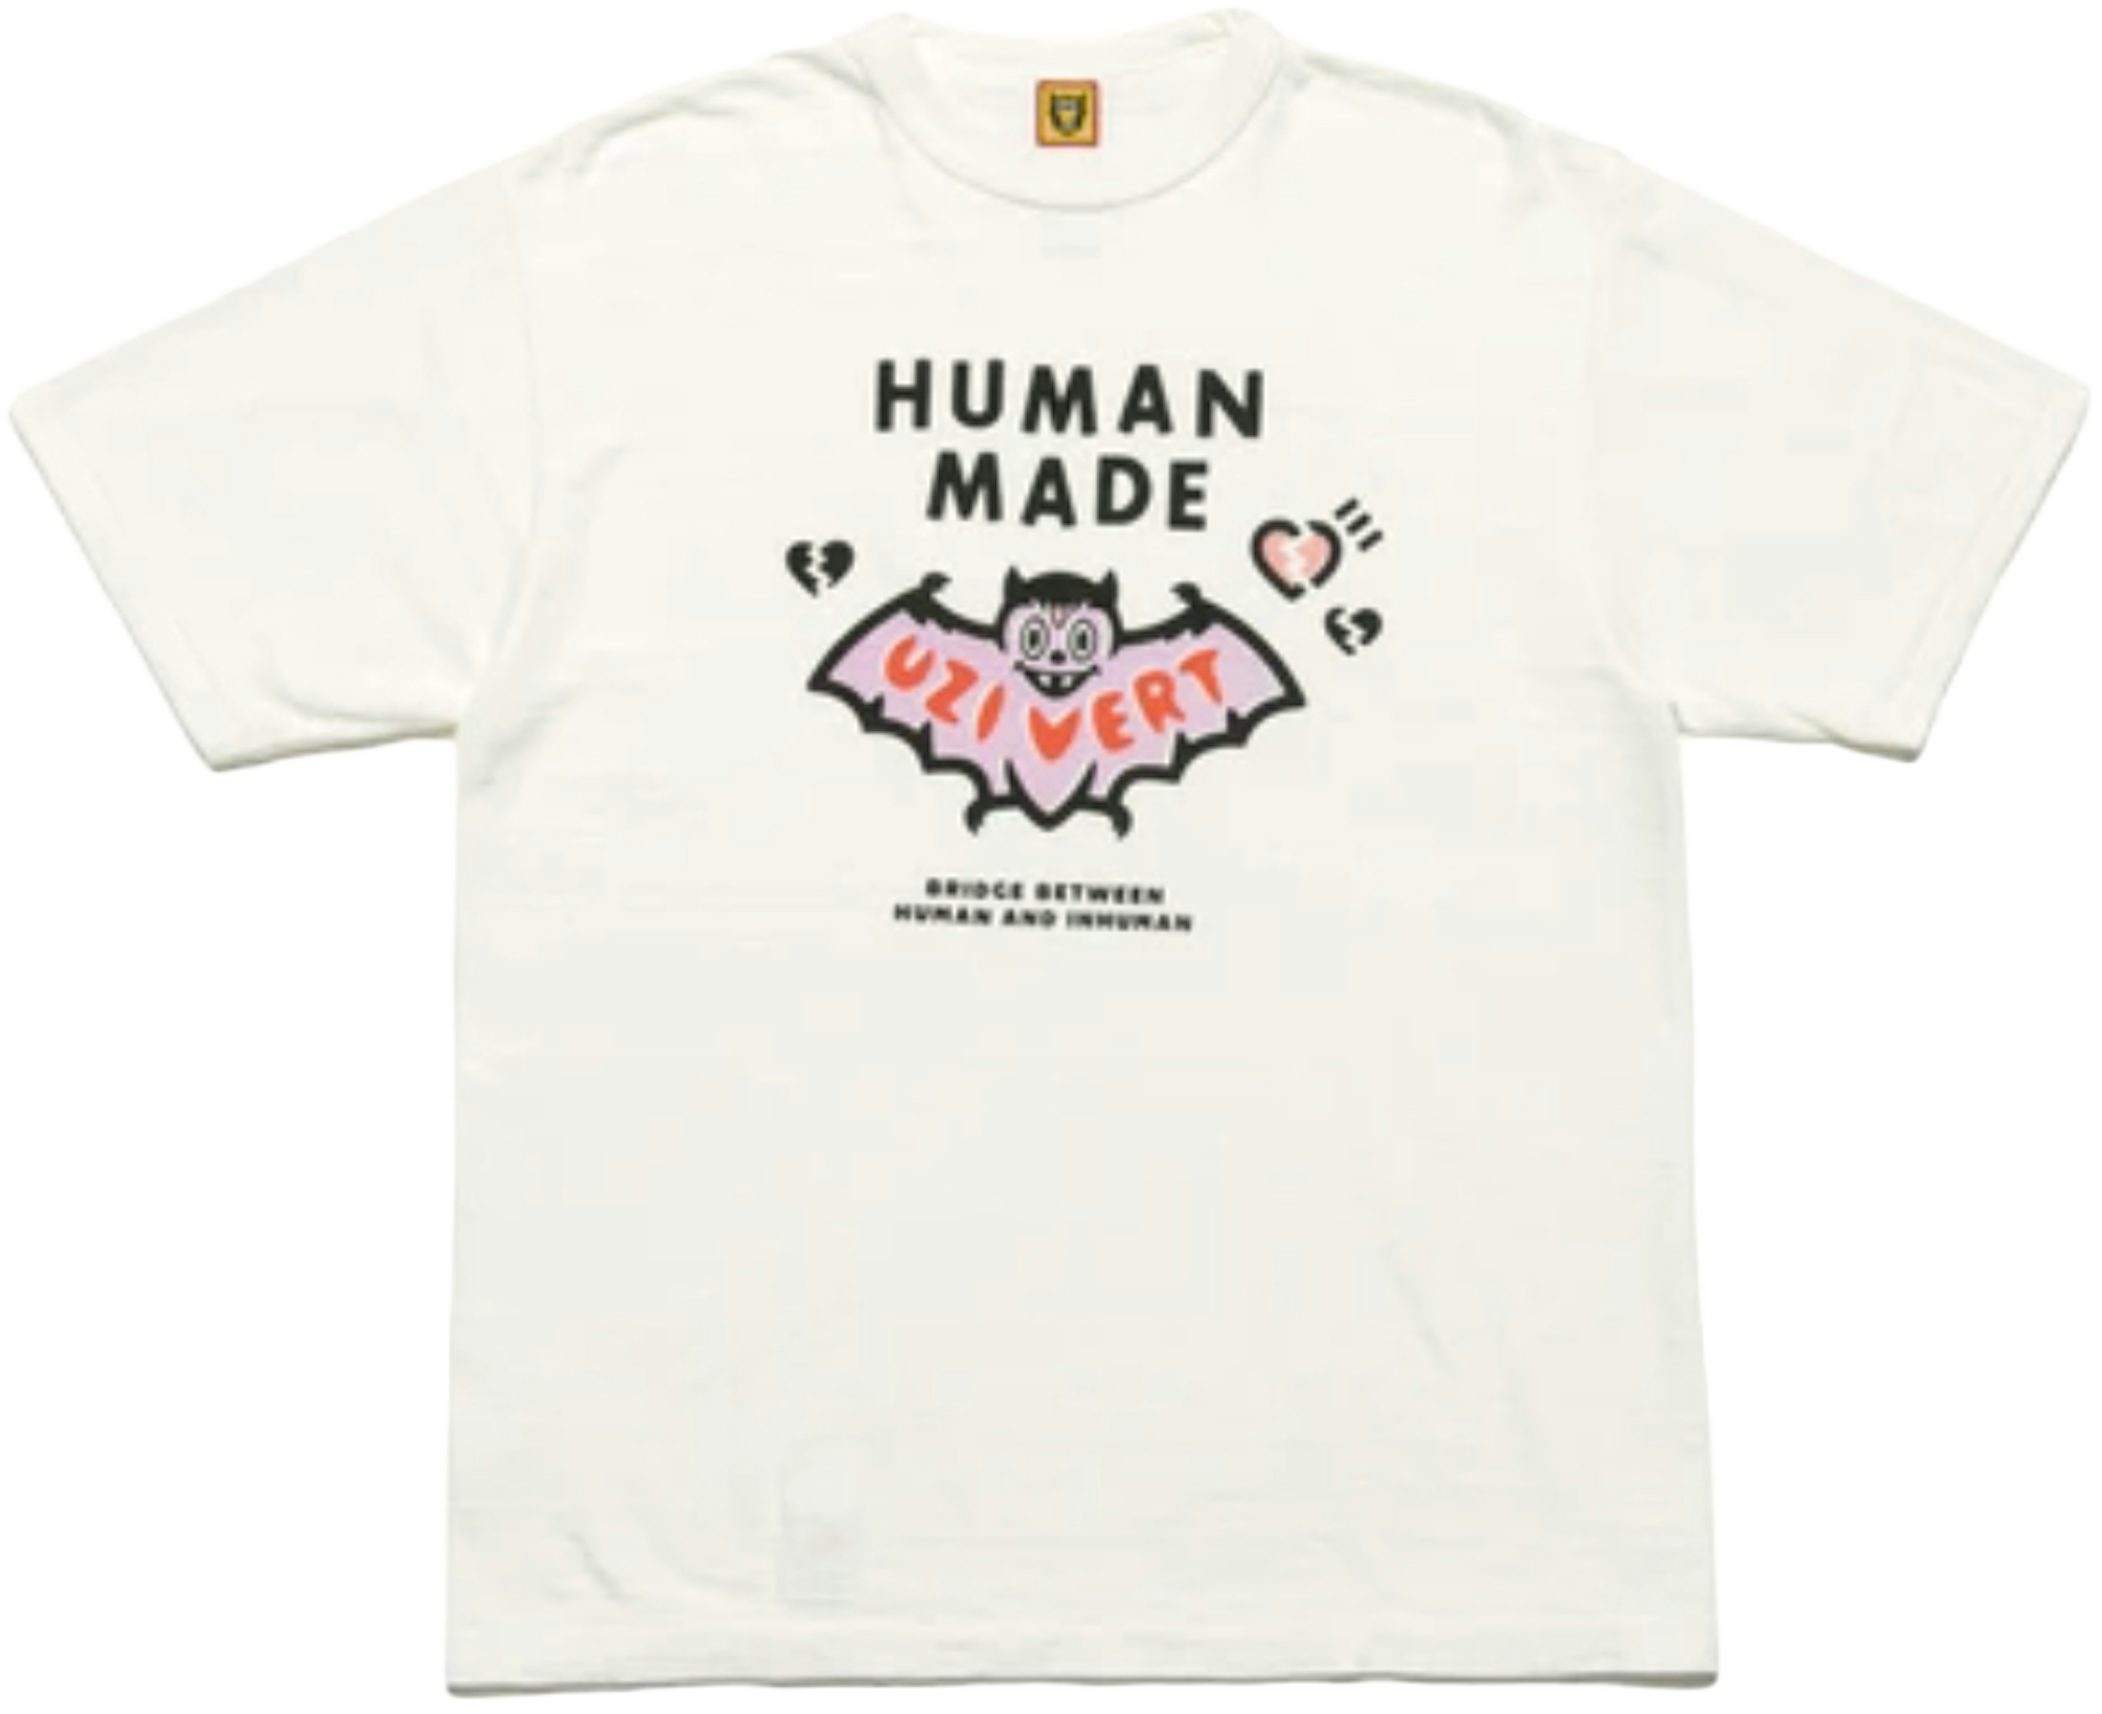 HUMAN MADE - buy online